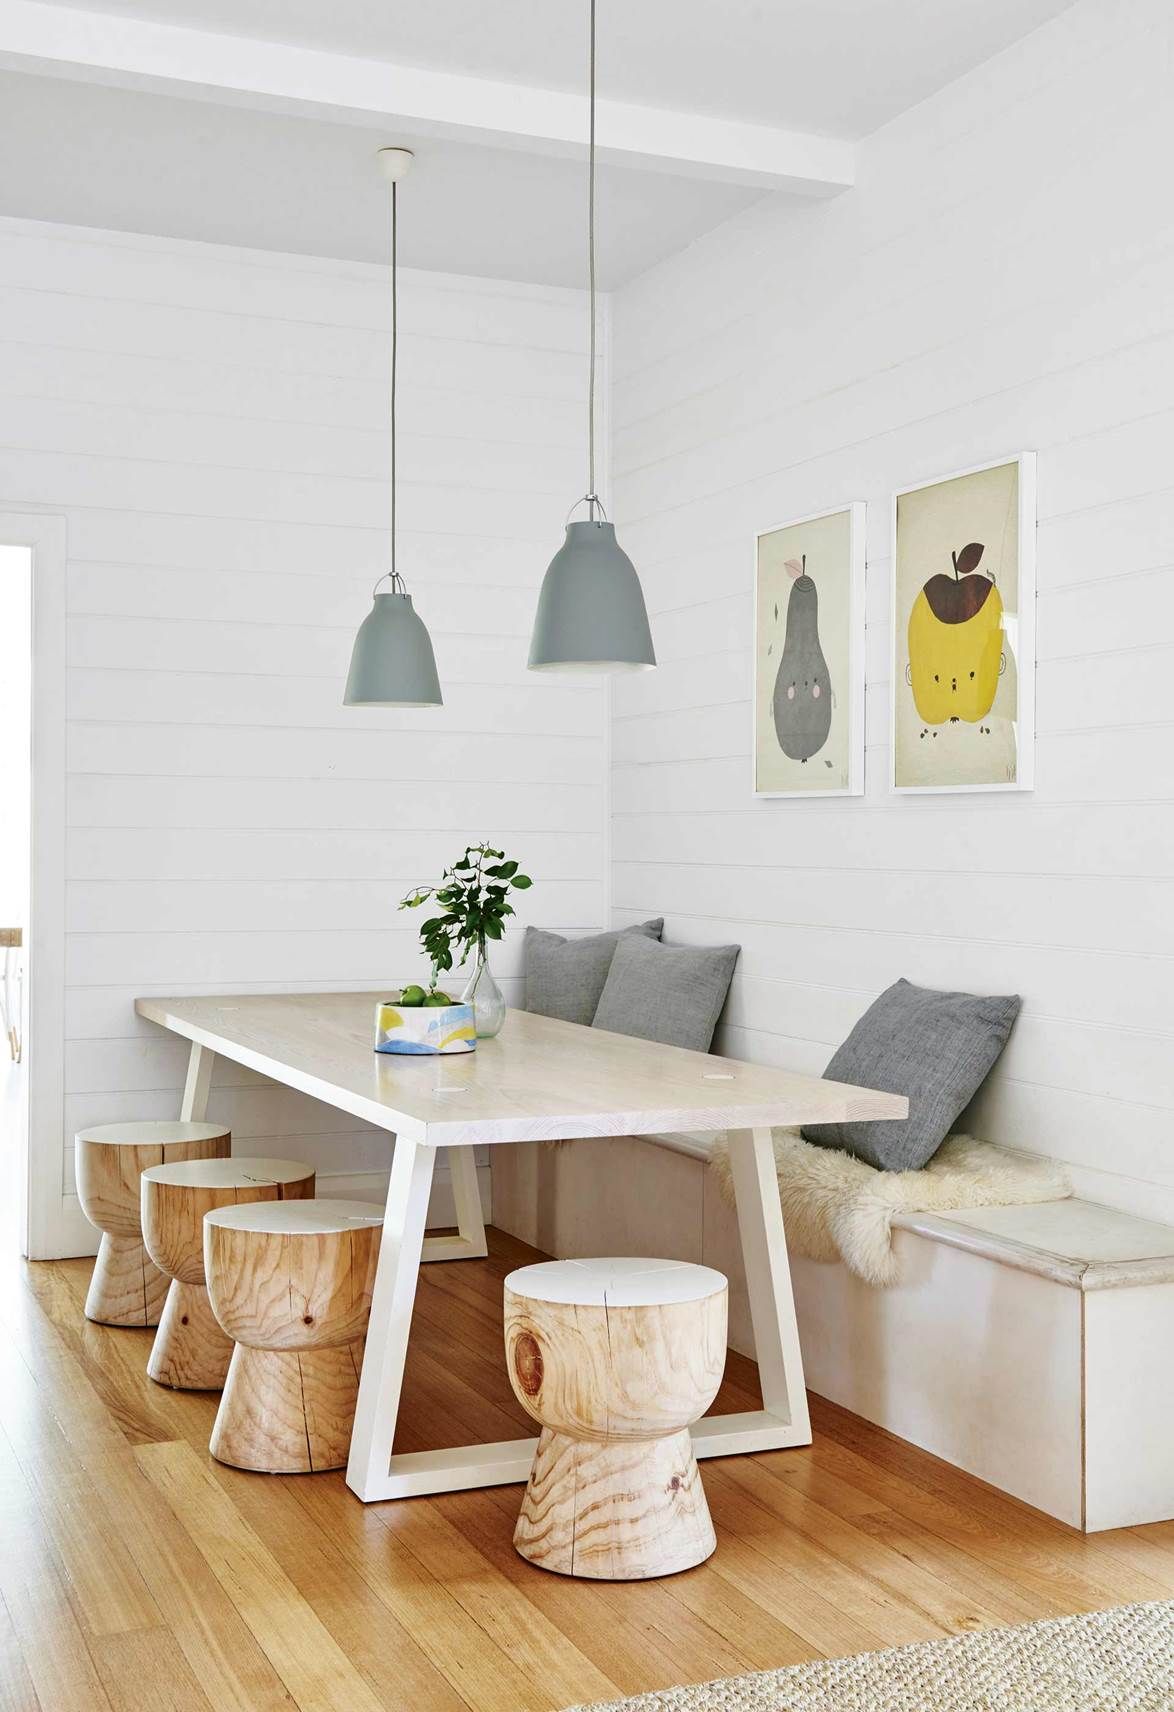 A Californian bungalow in Barwon Heads was given a sunny makeover